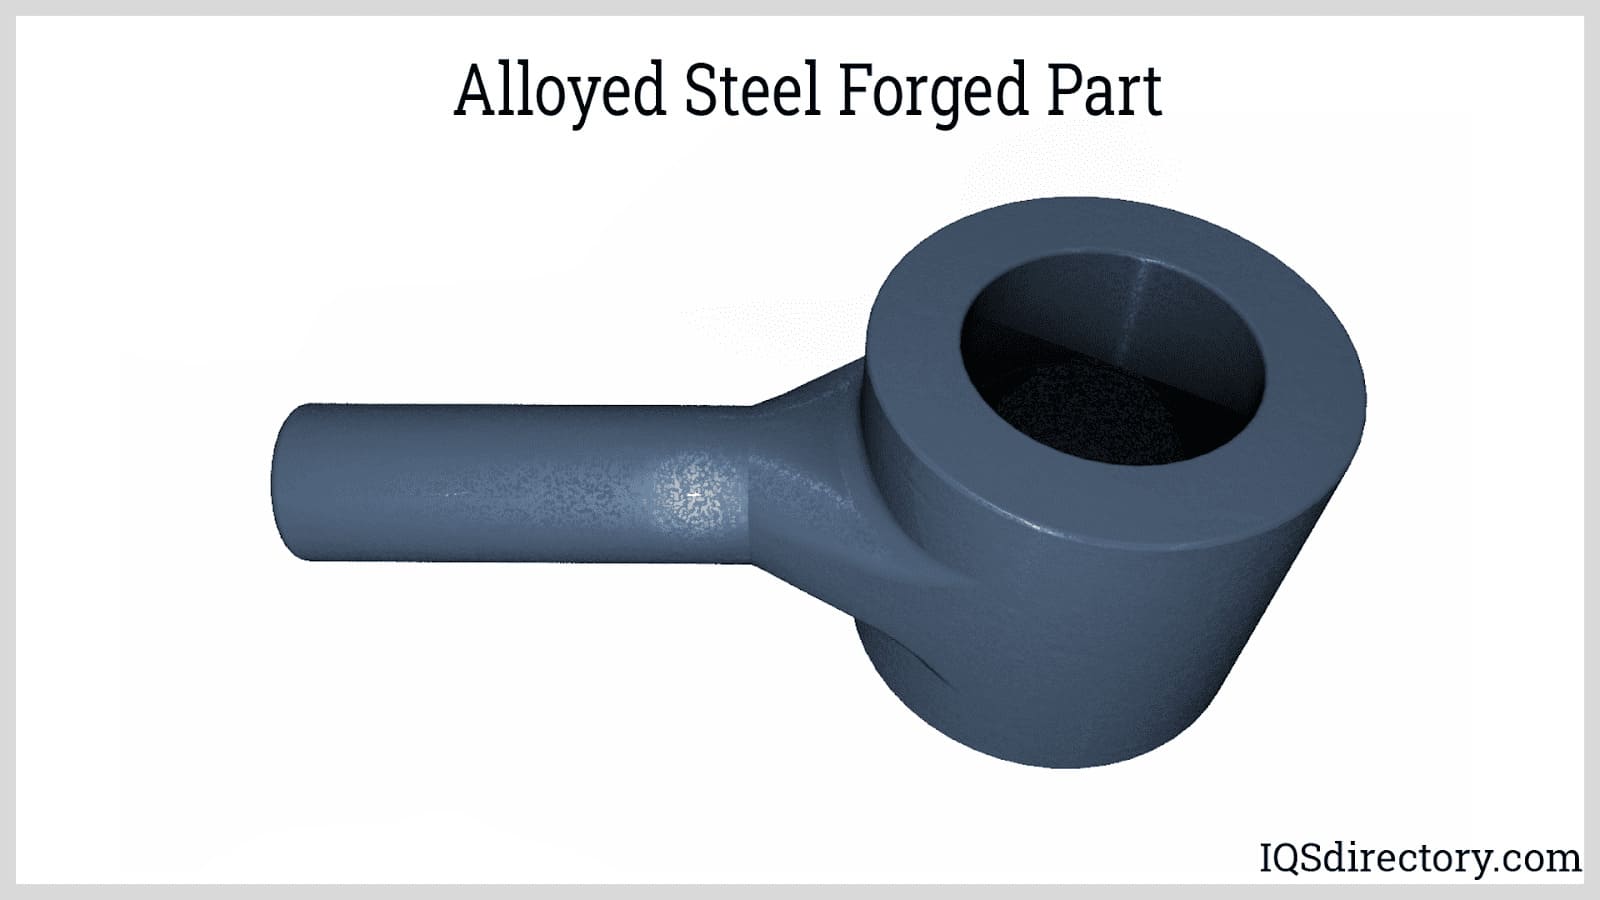 Alloyed Steel Forged Part